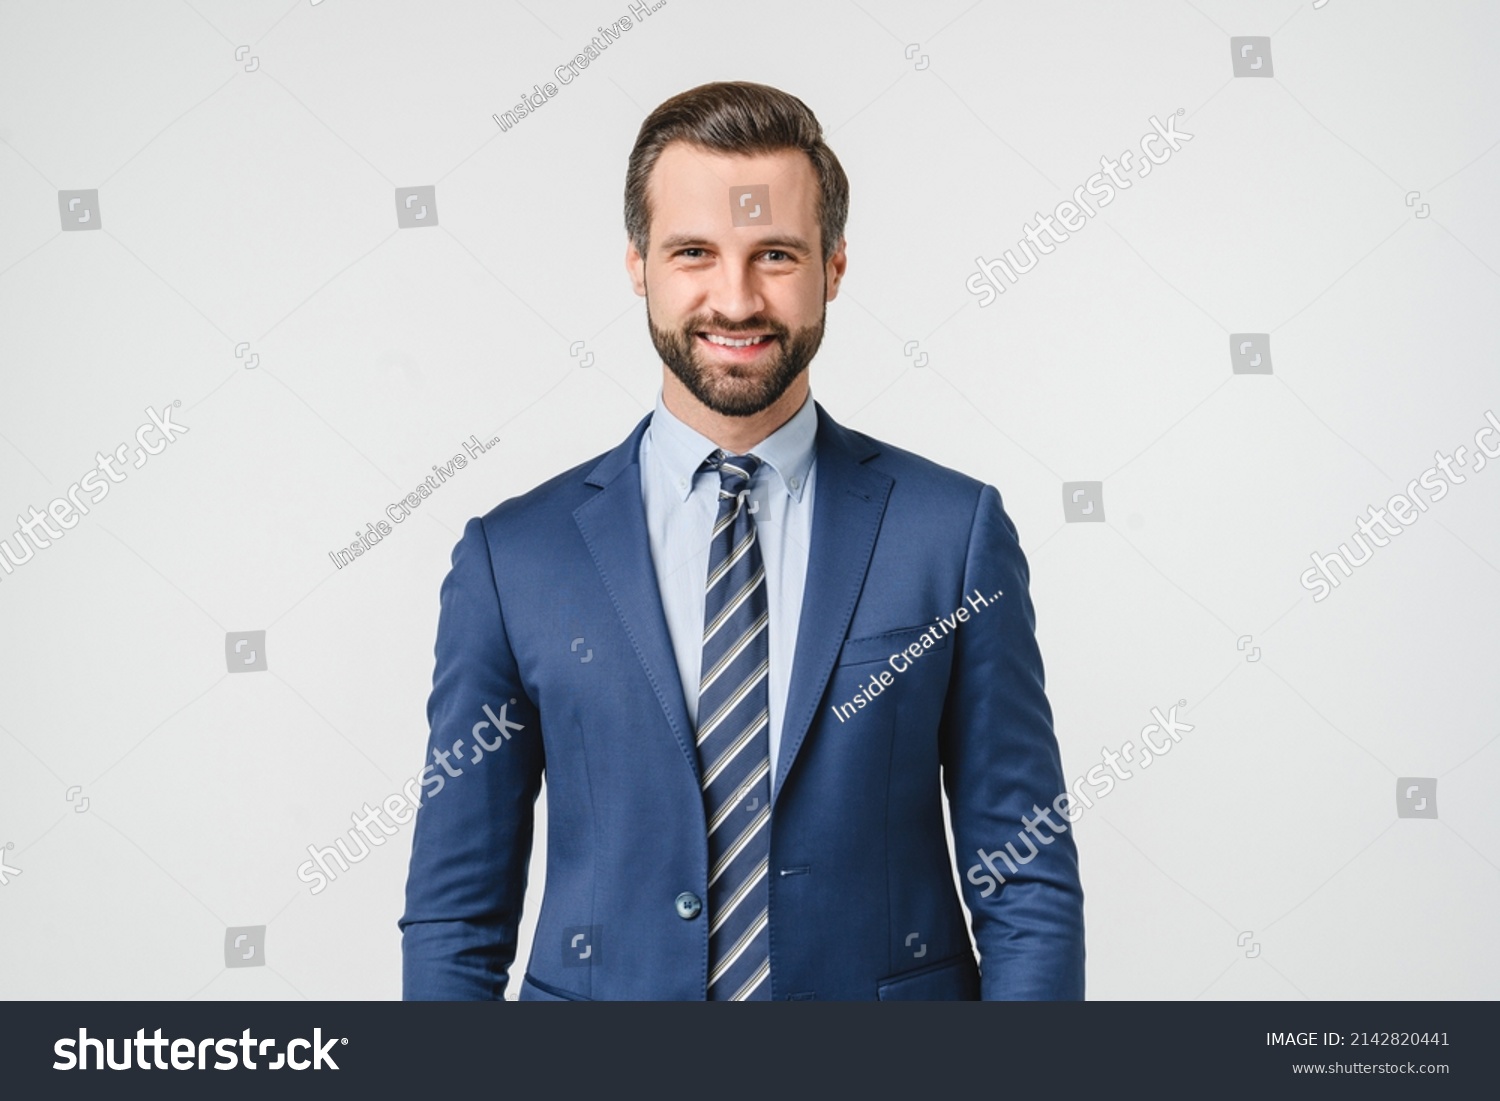 Portrait of handsome caucasian man in formal suit looking at camera smiling with toothy smile isolated in white background. Confident businessman ceo boss freelancer manager #2142820441